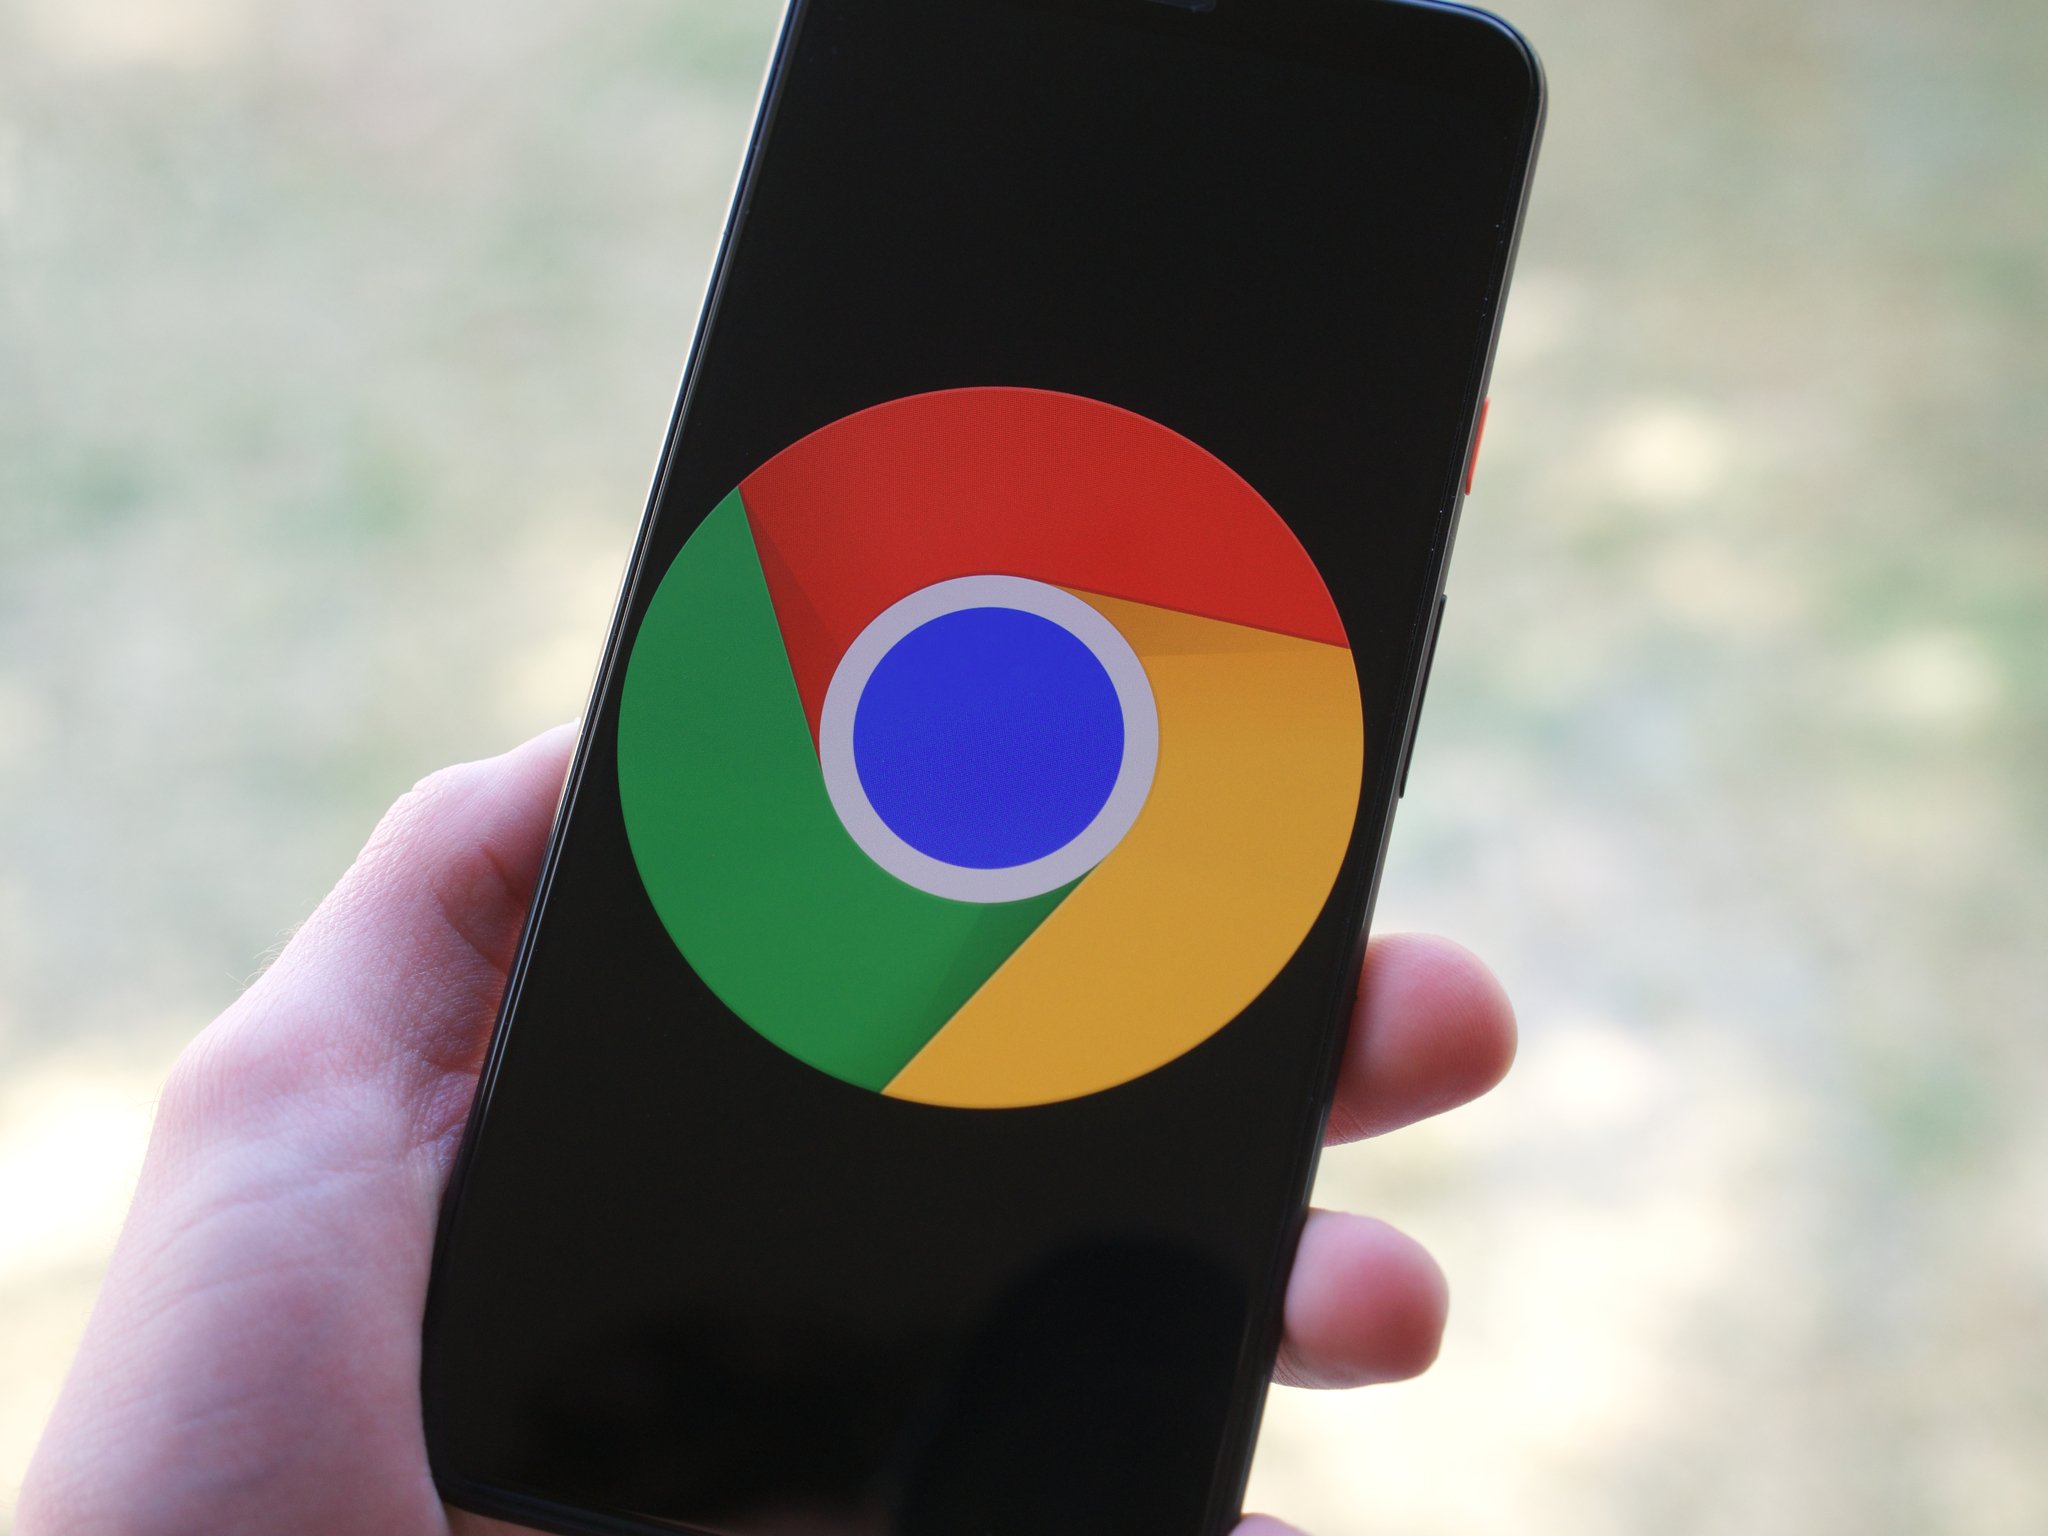 google-gives-the-chrome-icon-a-new-look-finally-flattens-it-out